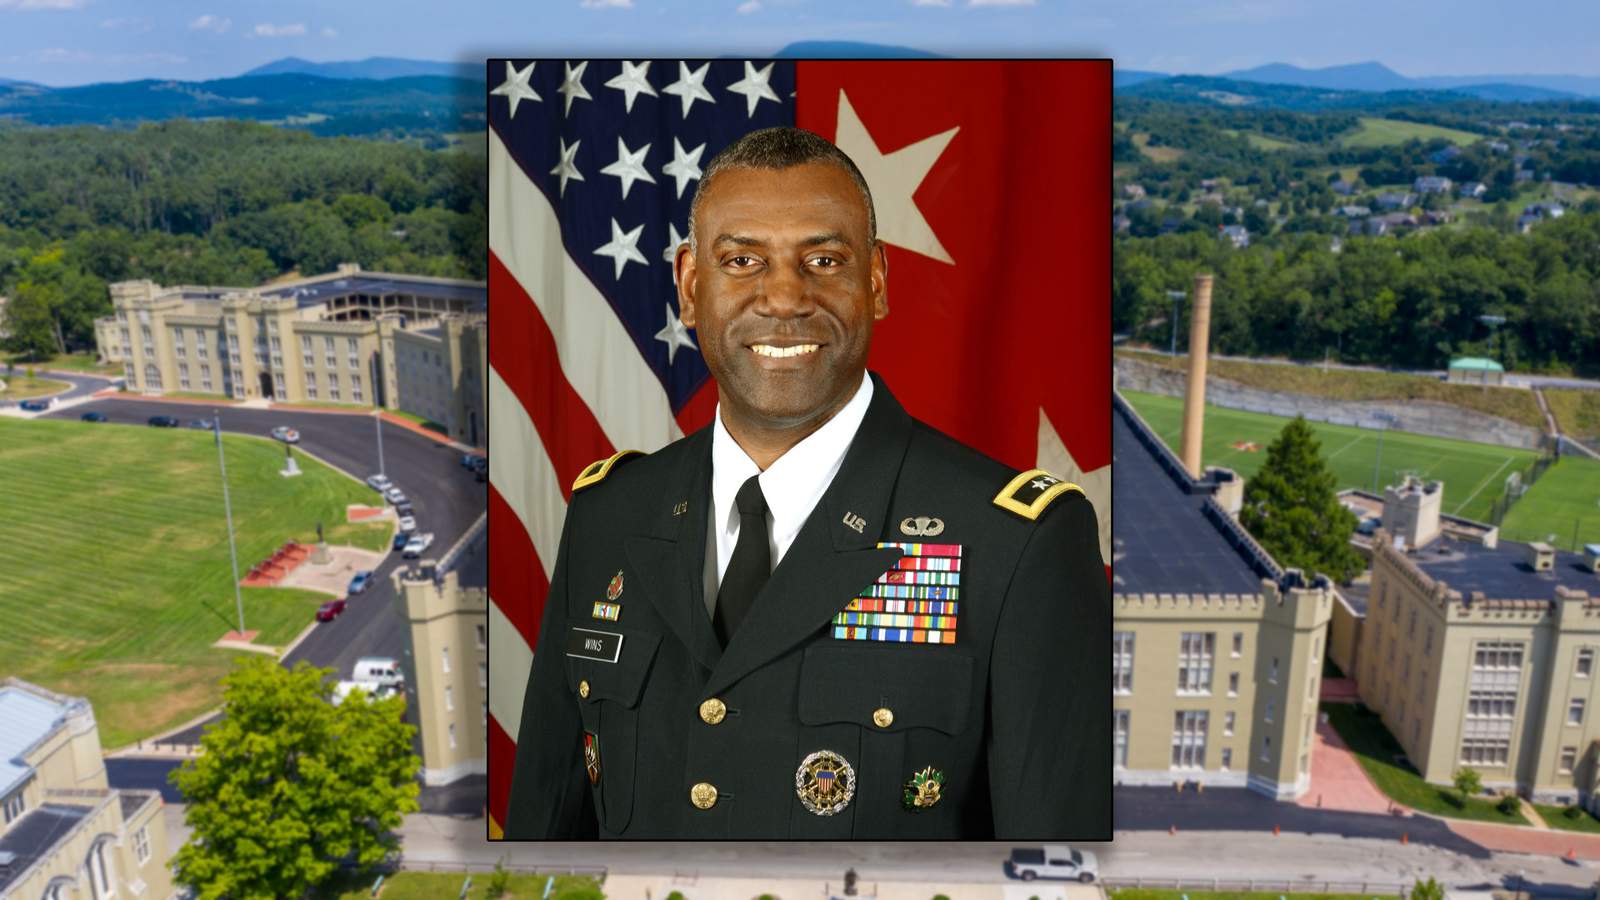 ‘I get to be an example’: VMI’s first African-American superintendent ushers in era of change